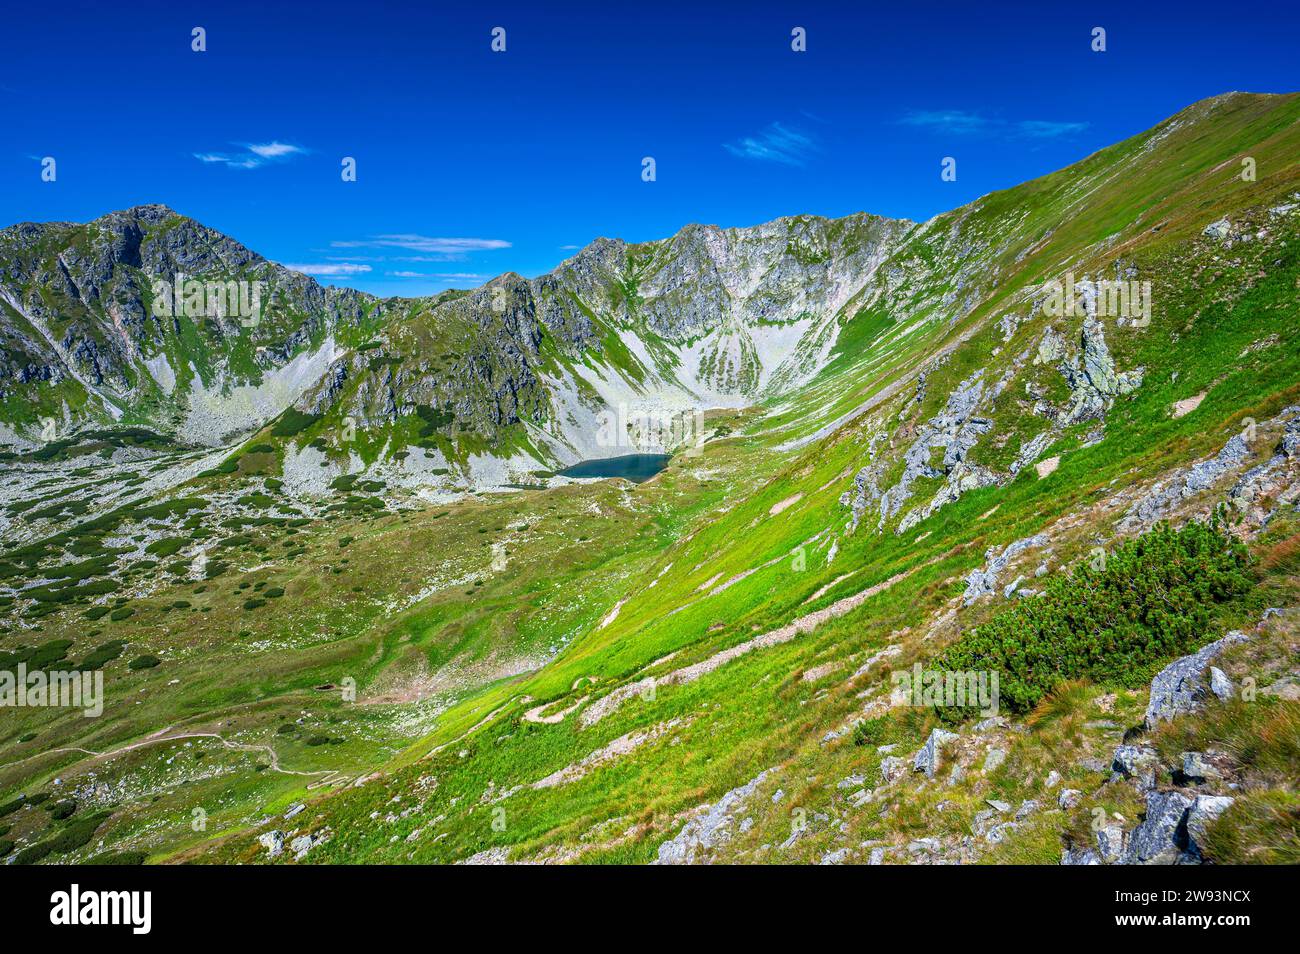 Mount Bystra, the highest peak of the Western Tatras. Stock Photo